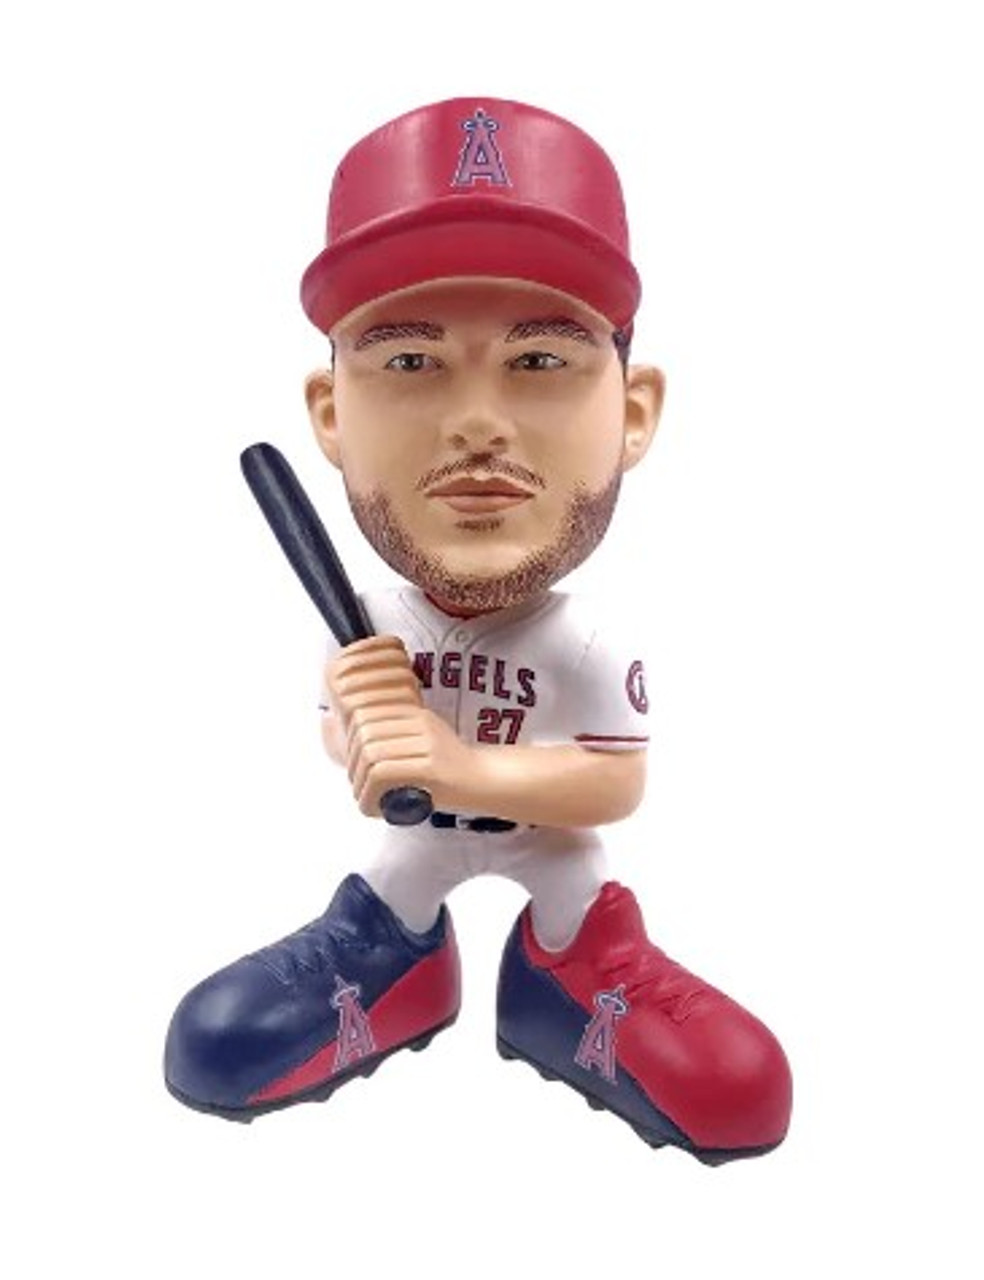 MLB Mike Trout Angels Funko Pop!